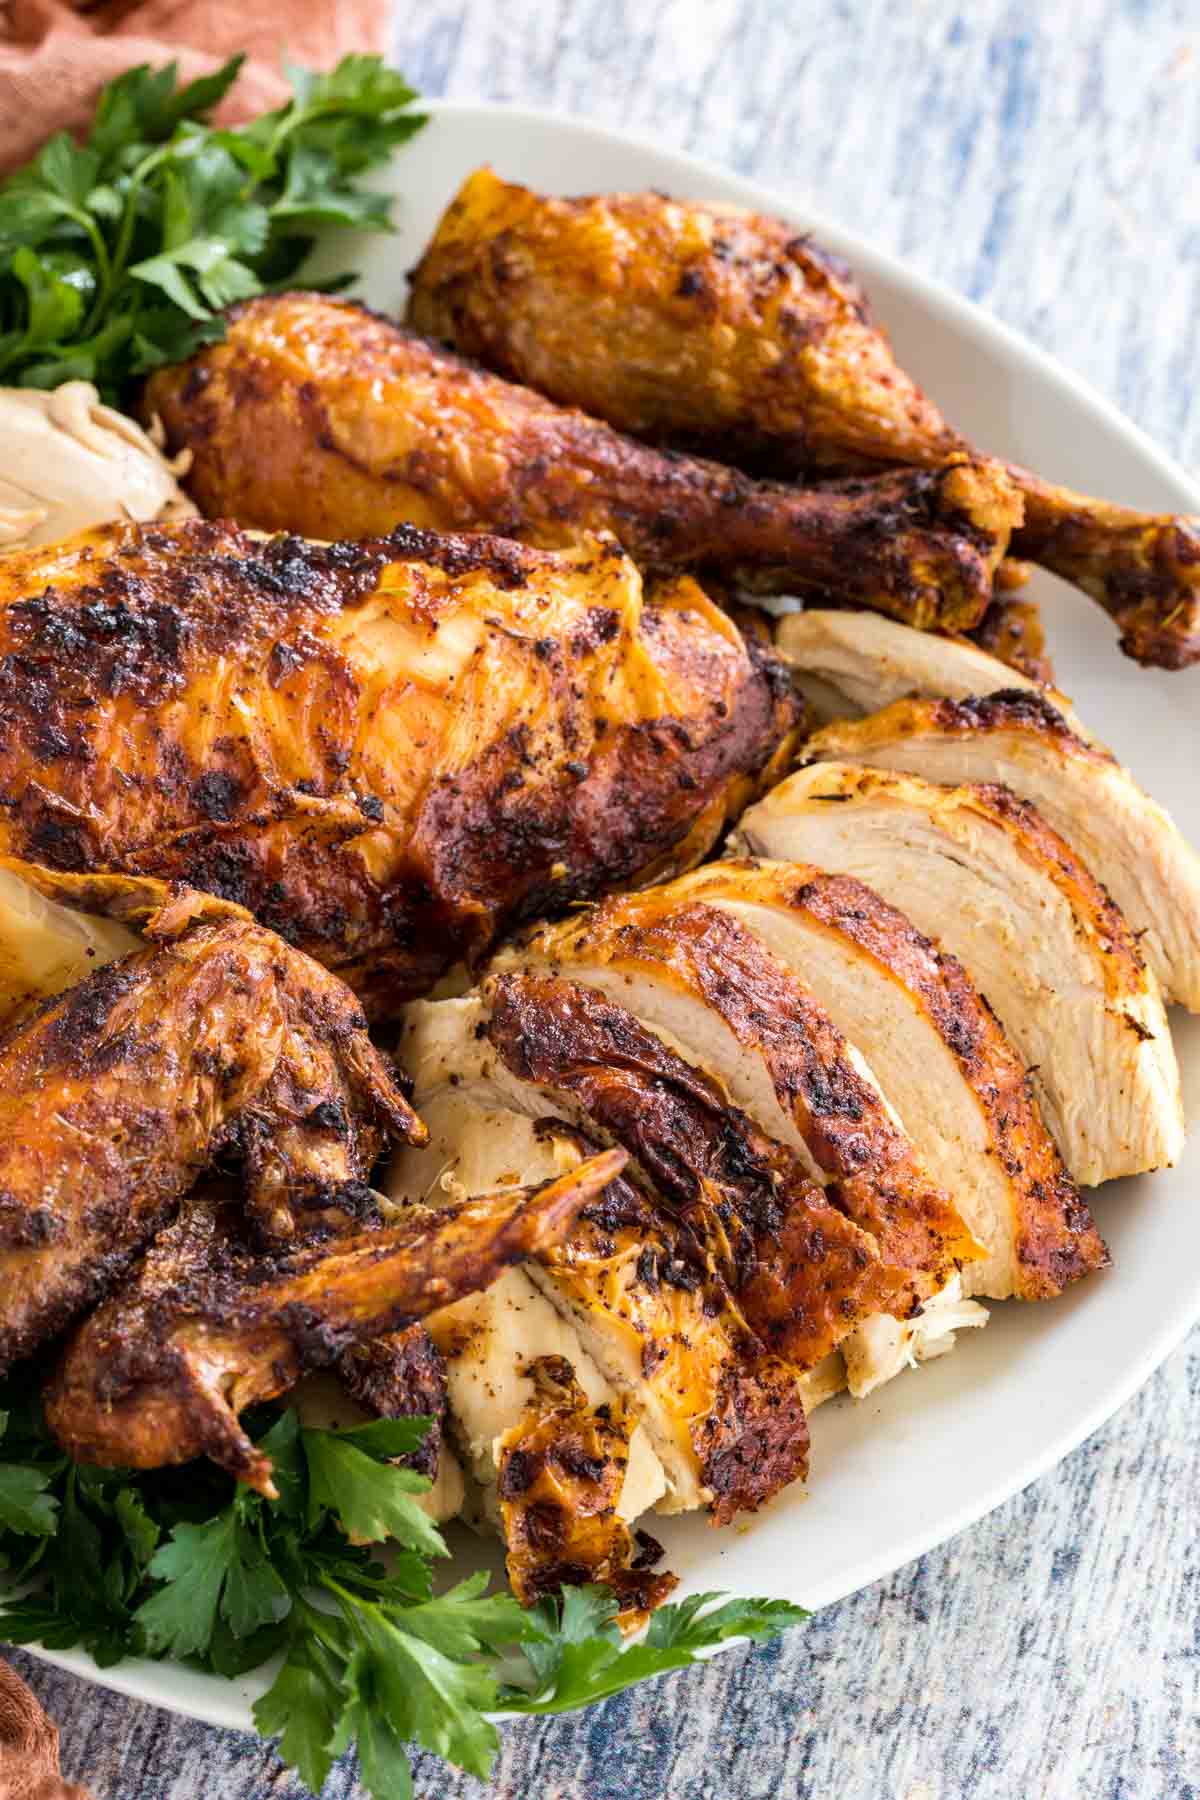 A plate of carved rotisserie chicken breasts, wings, and drumsticks.